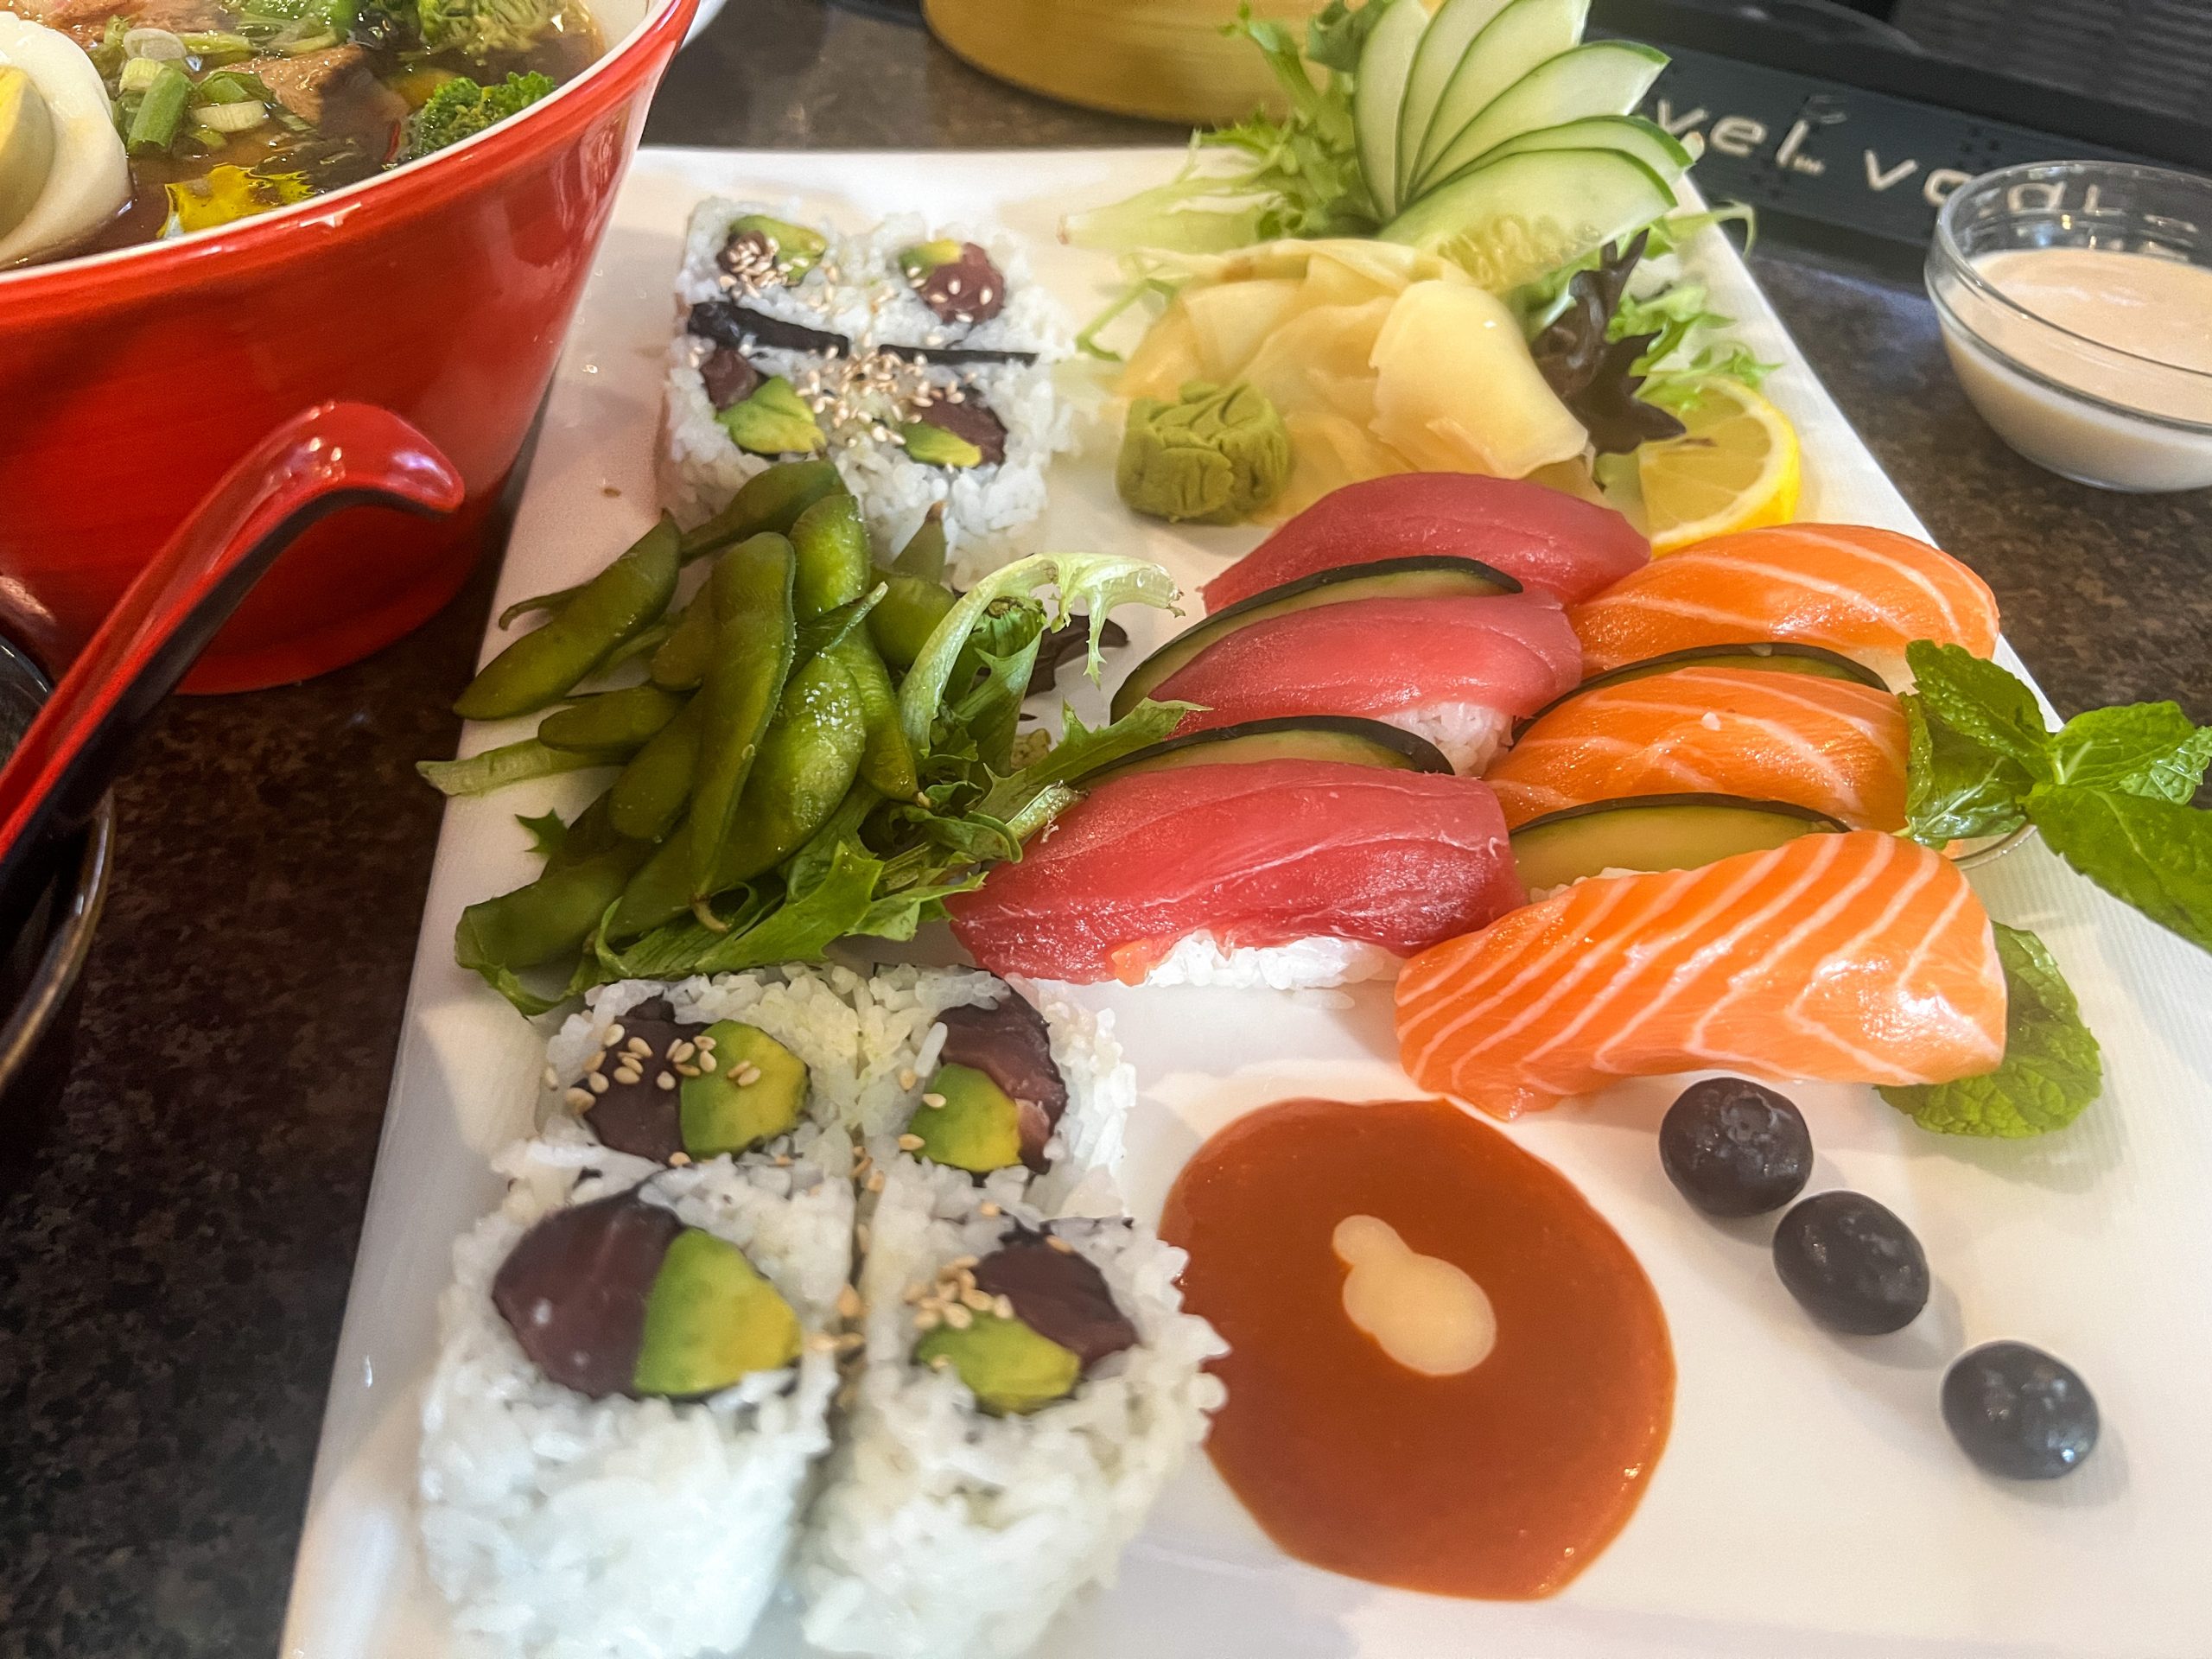 Yaki-Mono's Japanese cuisine is full of vibrant dishes like this selection from their lunchbox offerings with sushi tuna and salmon, edamame and a California roll